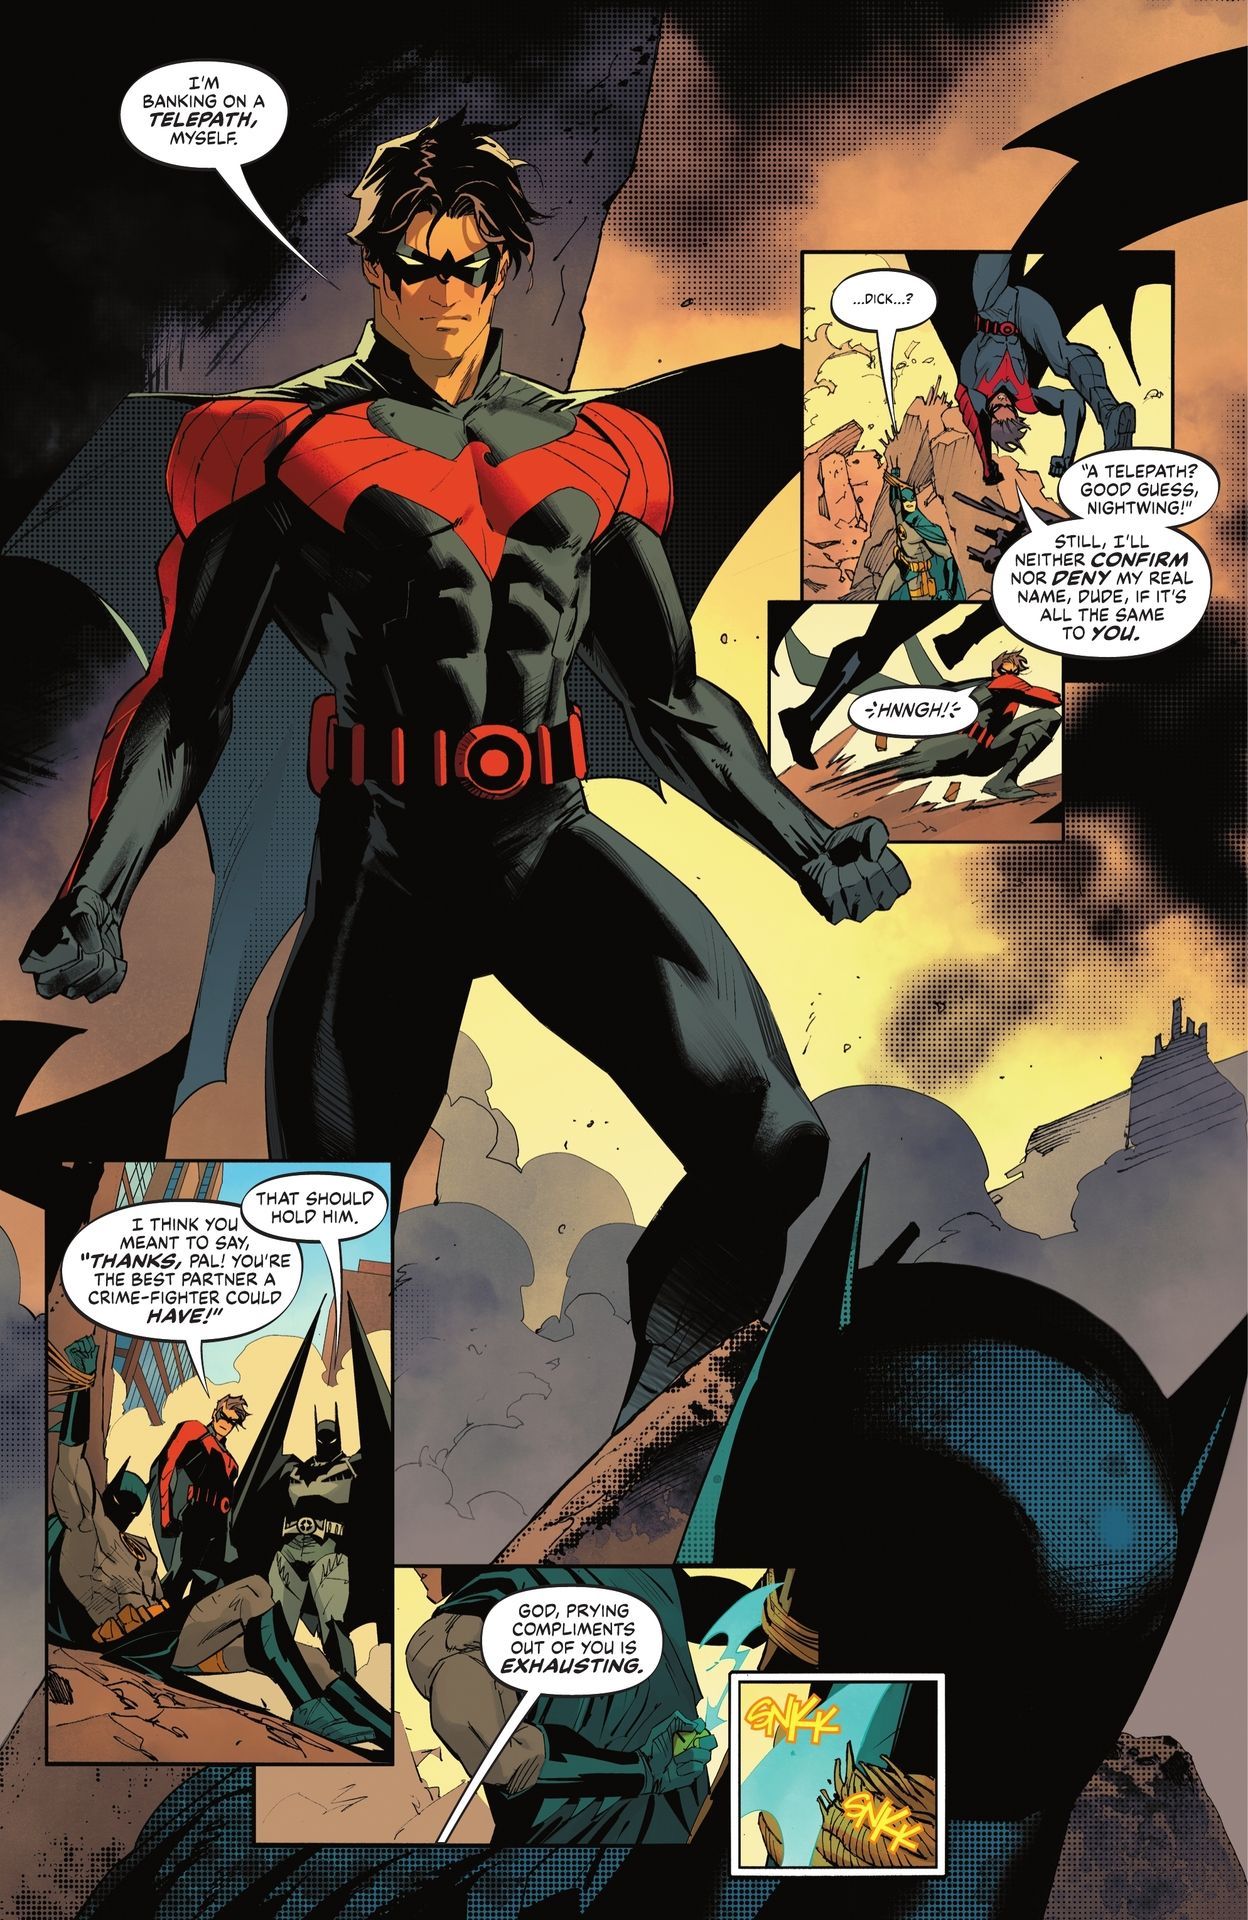 Nightwing standing tall wearing his red Kingdom Come suit